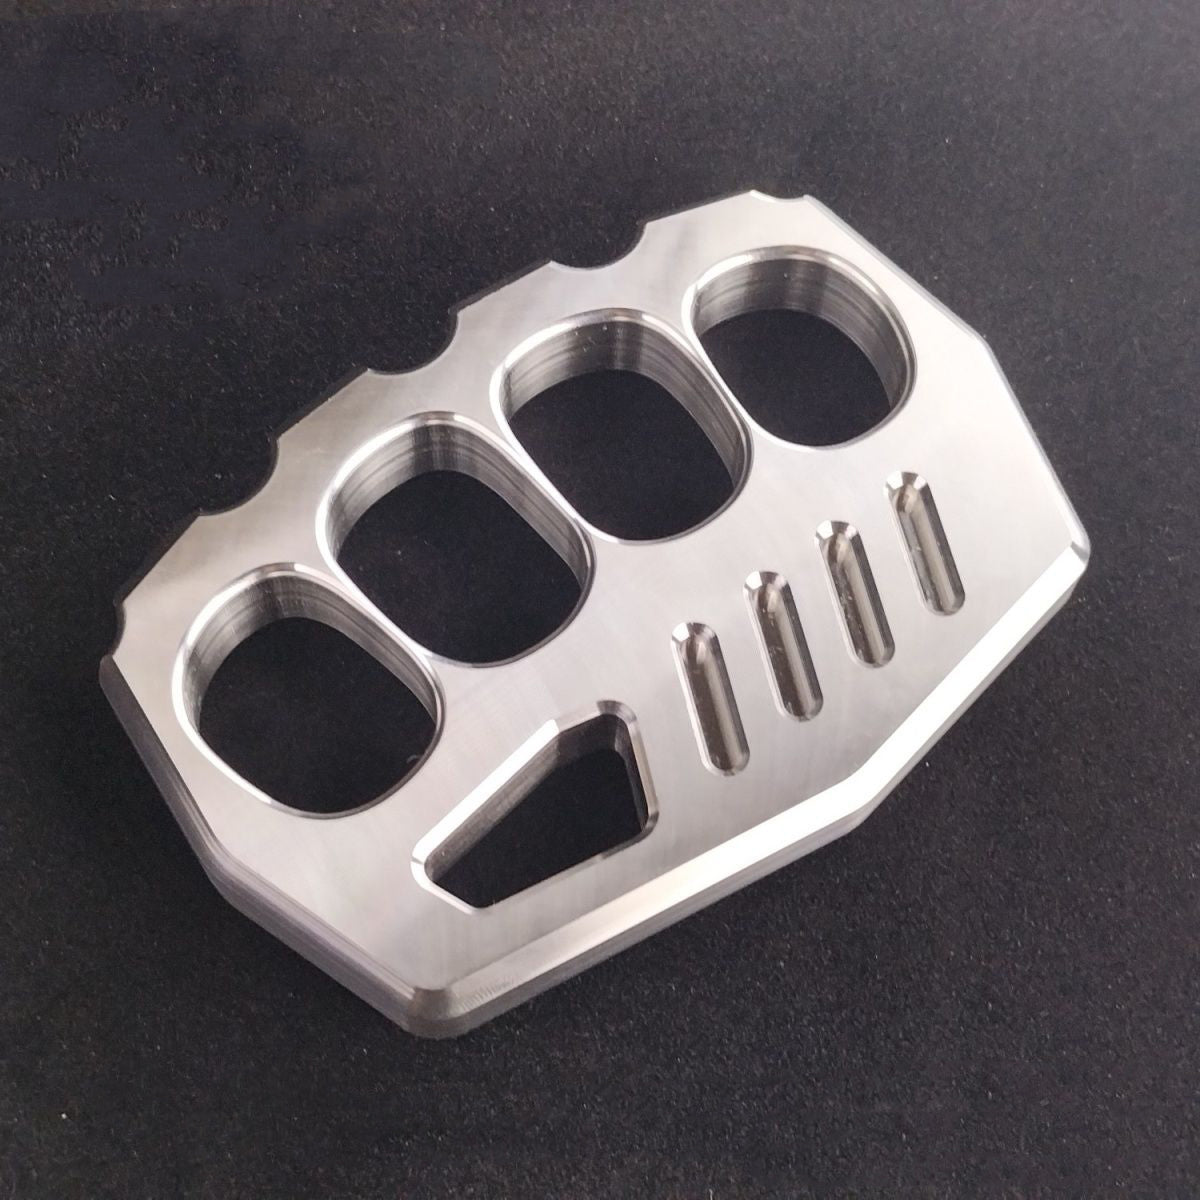 Solid Steel Knuckle Duster Self-defense Window Breaking EDC Tool Outdoor Boxing Training Combat Protective Gear